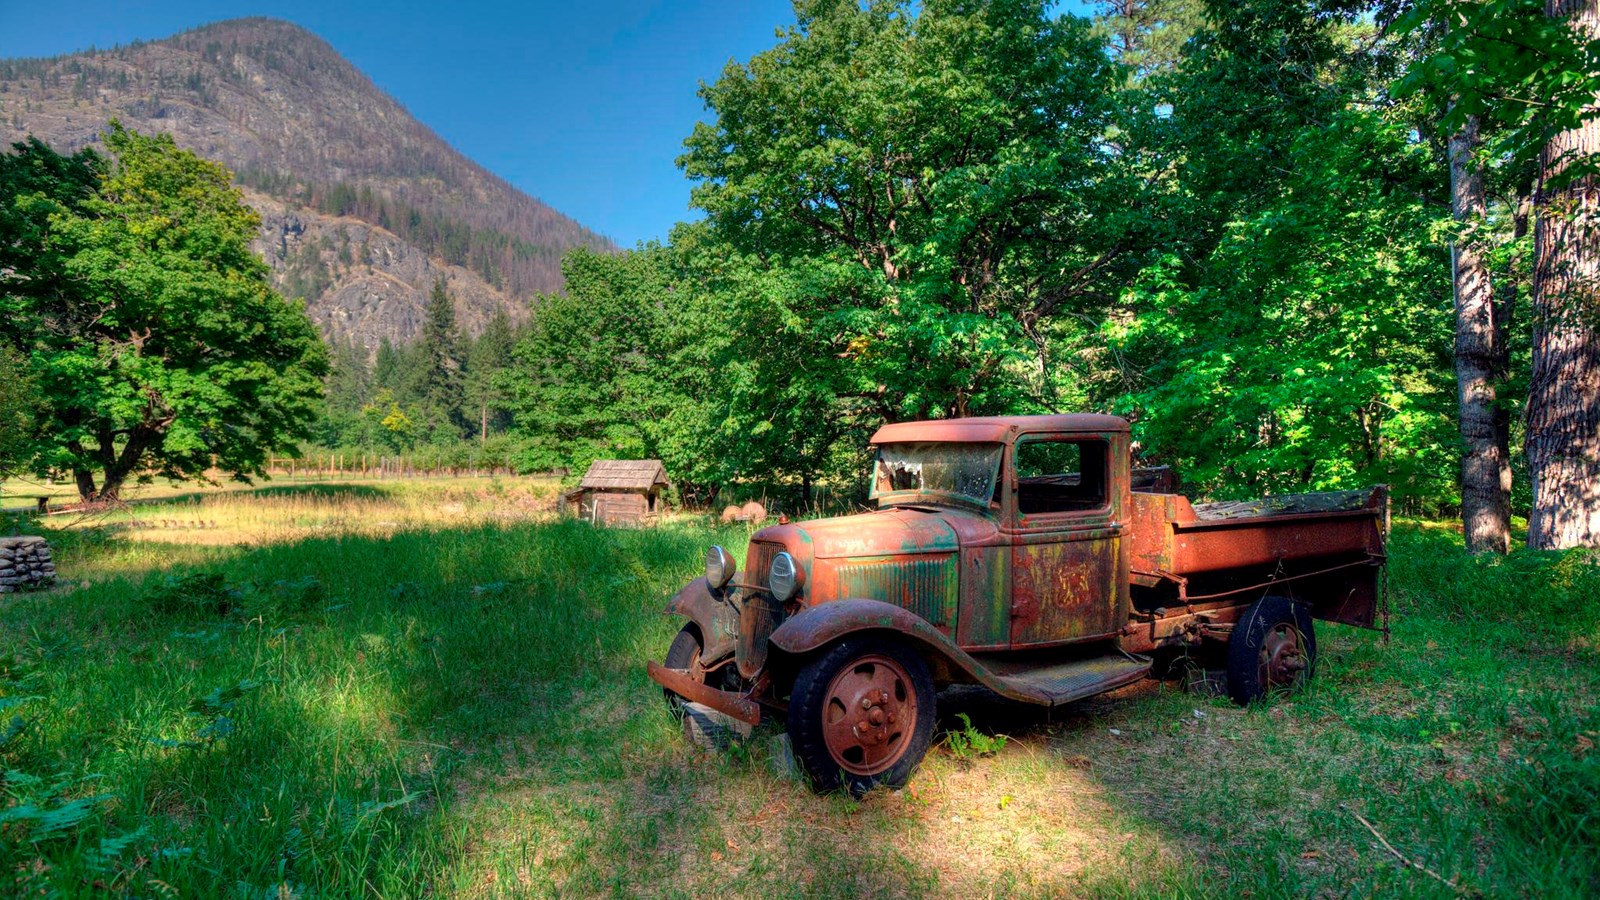 A rusted pickup truck from the 1940s sits in a field and open forest